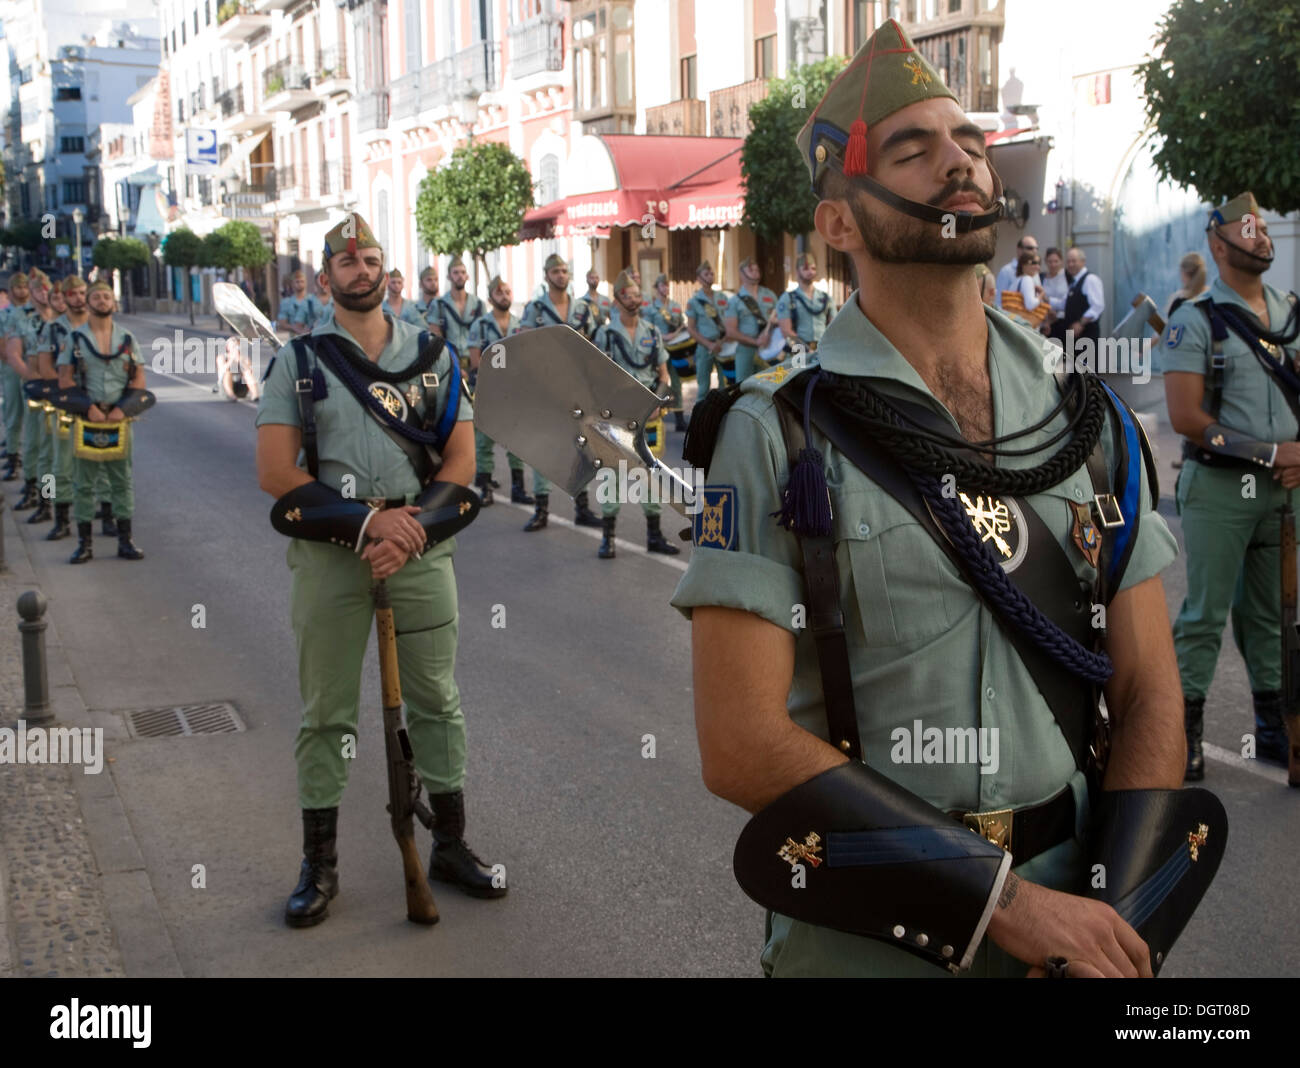 Soldiers military band parade march for national day celebration Ronda, Spain Stock Photo